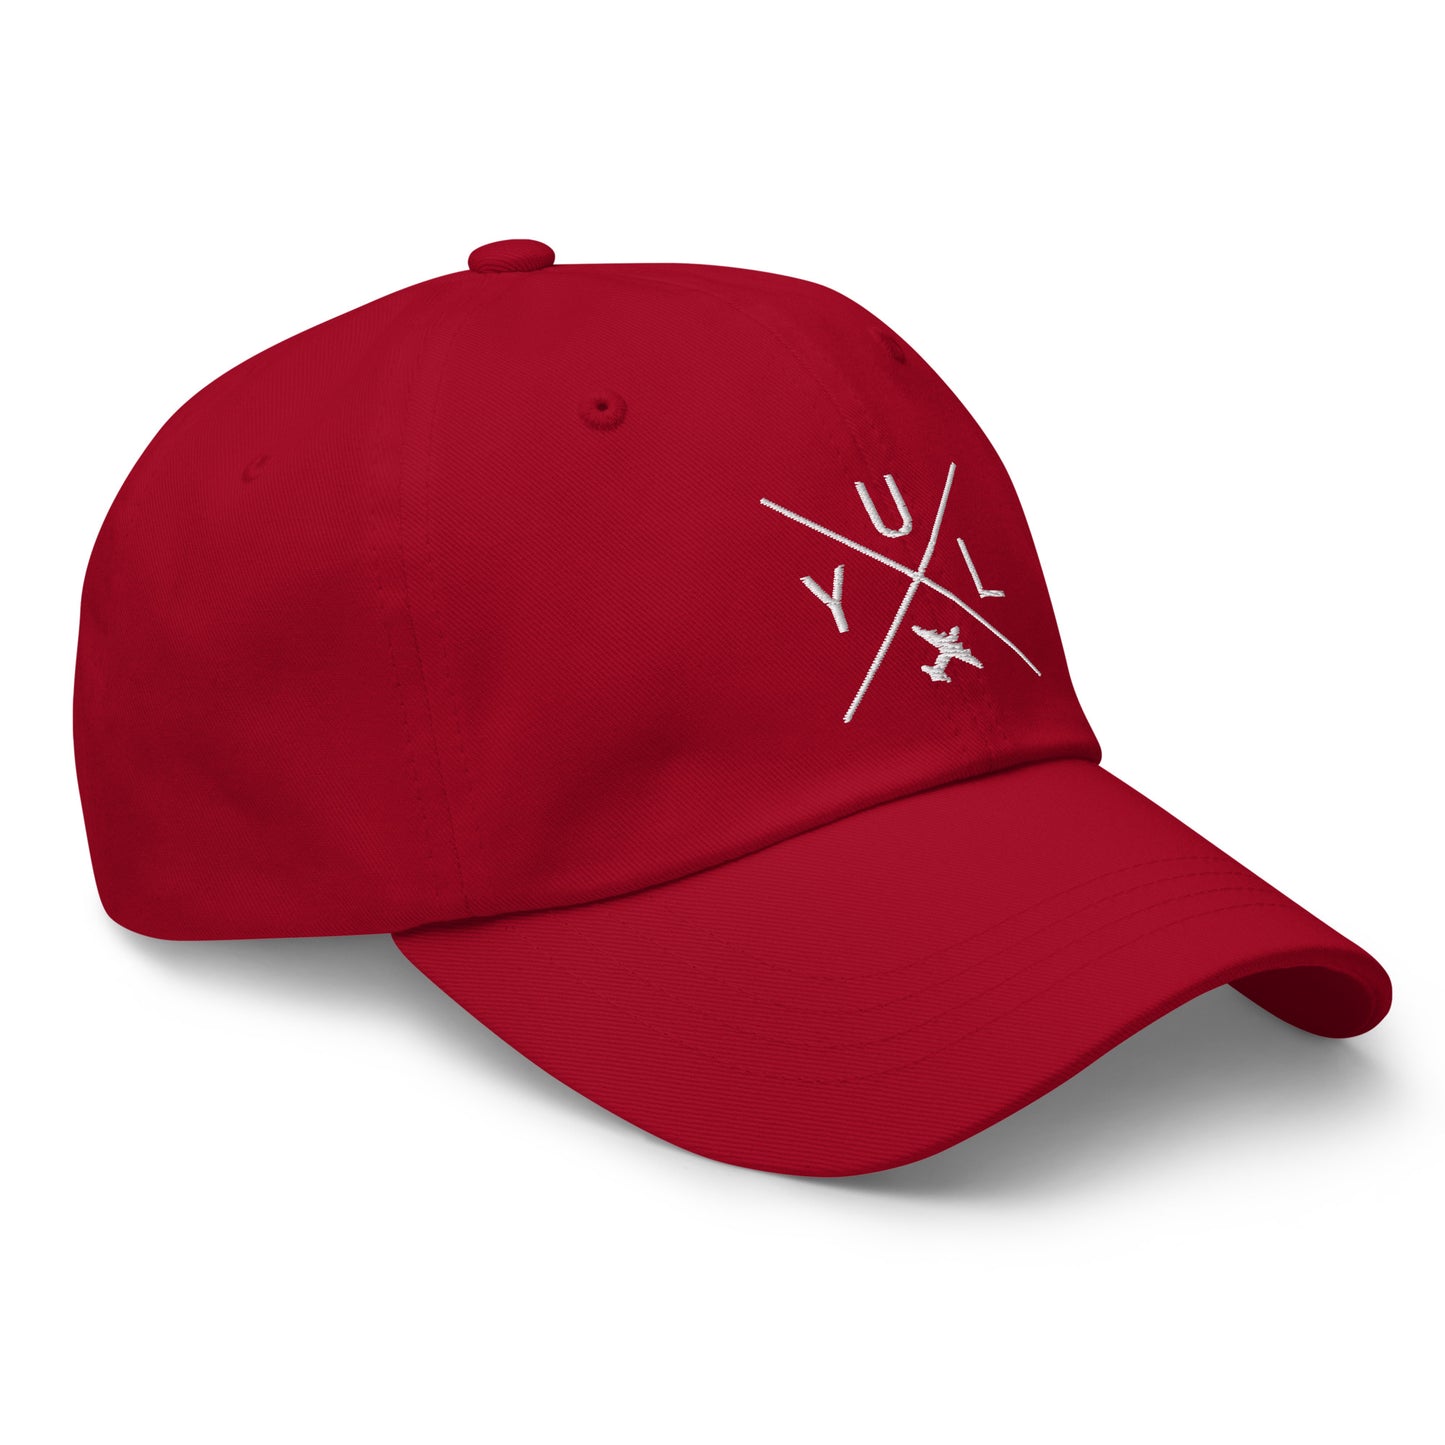 Crossed-X Dad Hat - White • YUL Montreal • YHM Designs - Image 14